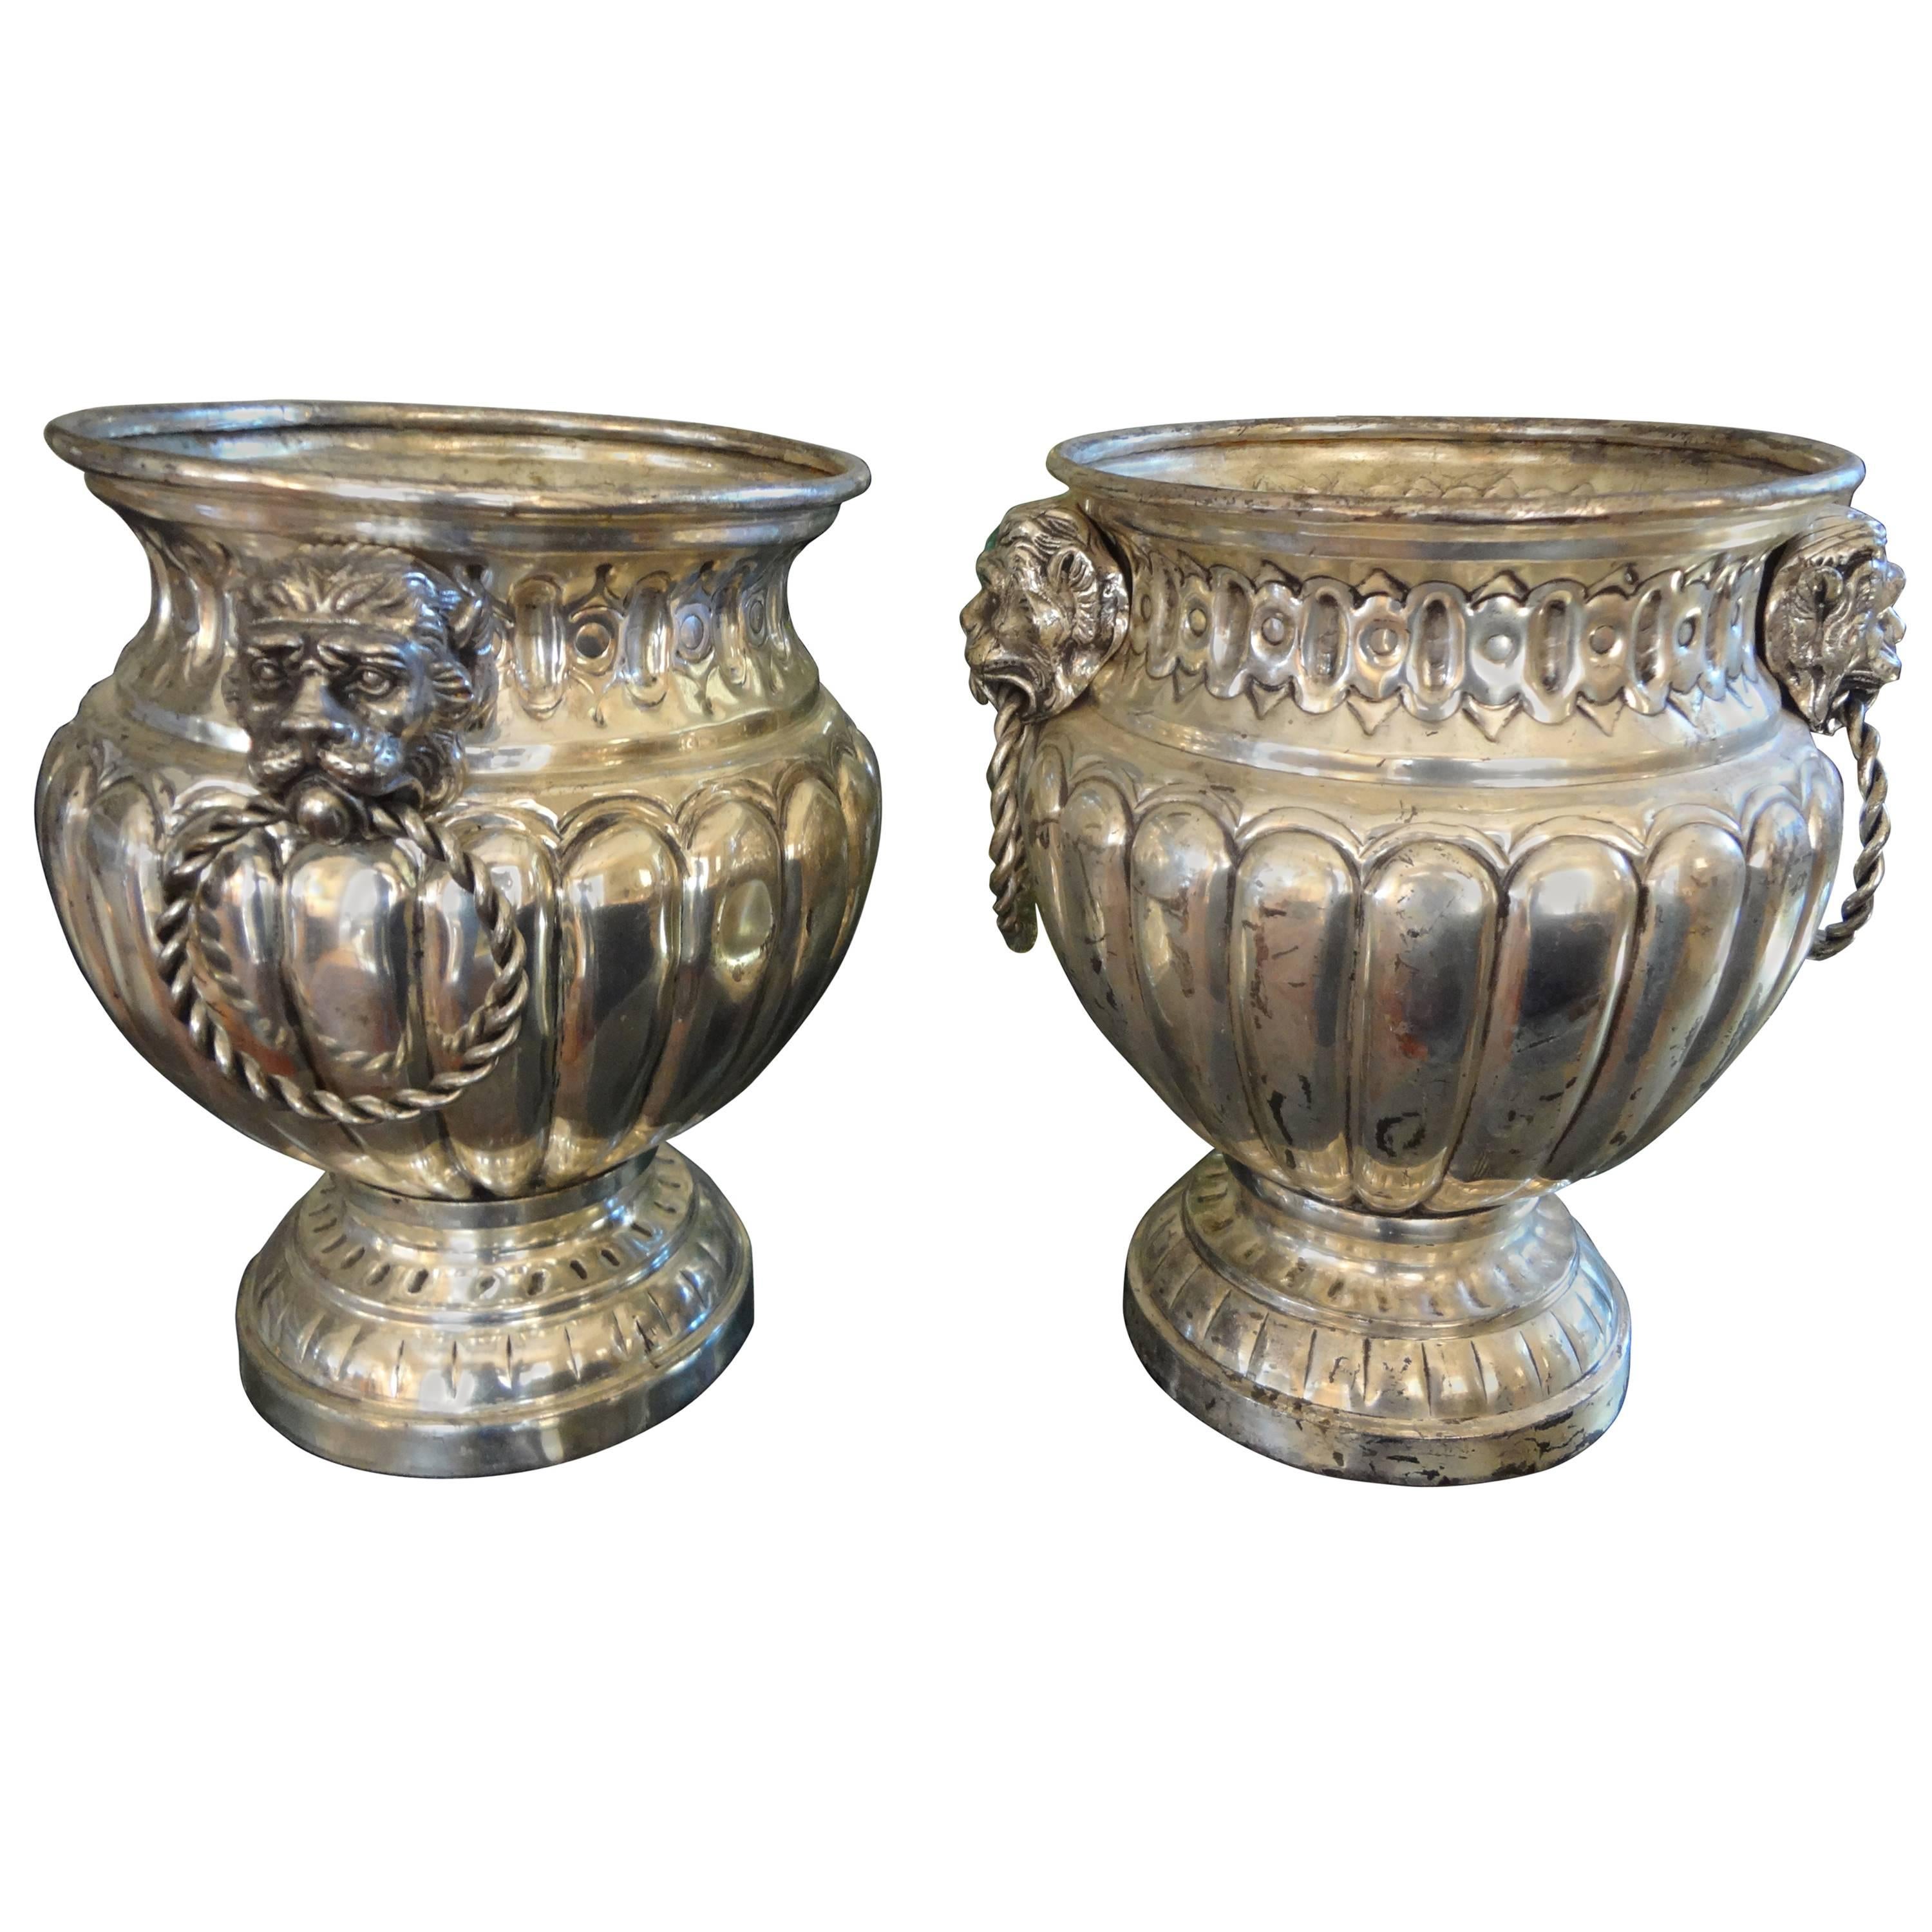 Lovely matched pair of silver plated wine or Champagne coolers with lion's head handles.
Would look great as planters with orchids.